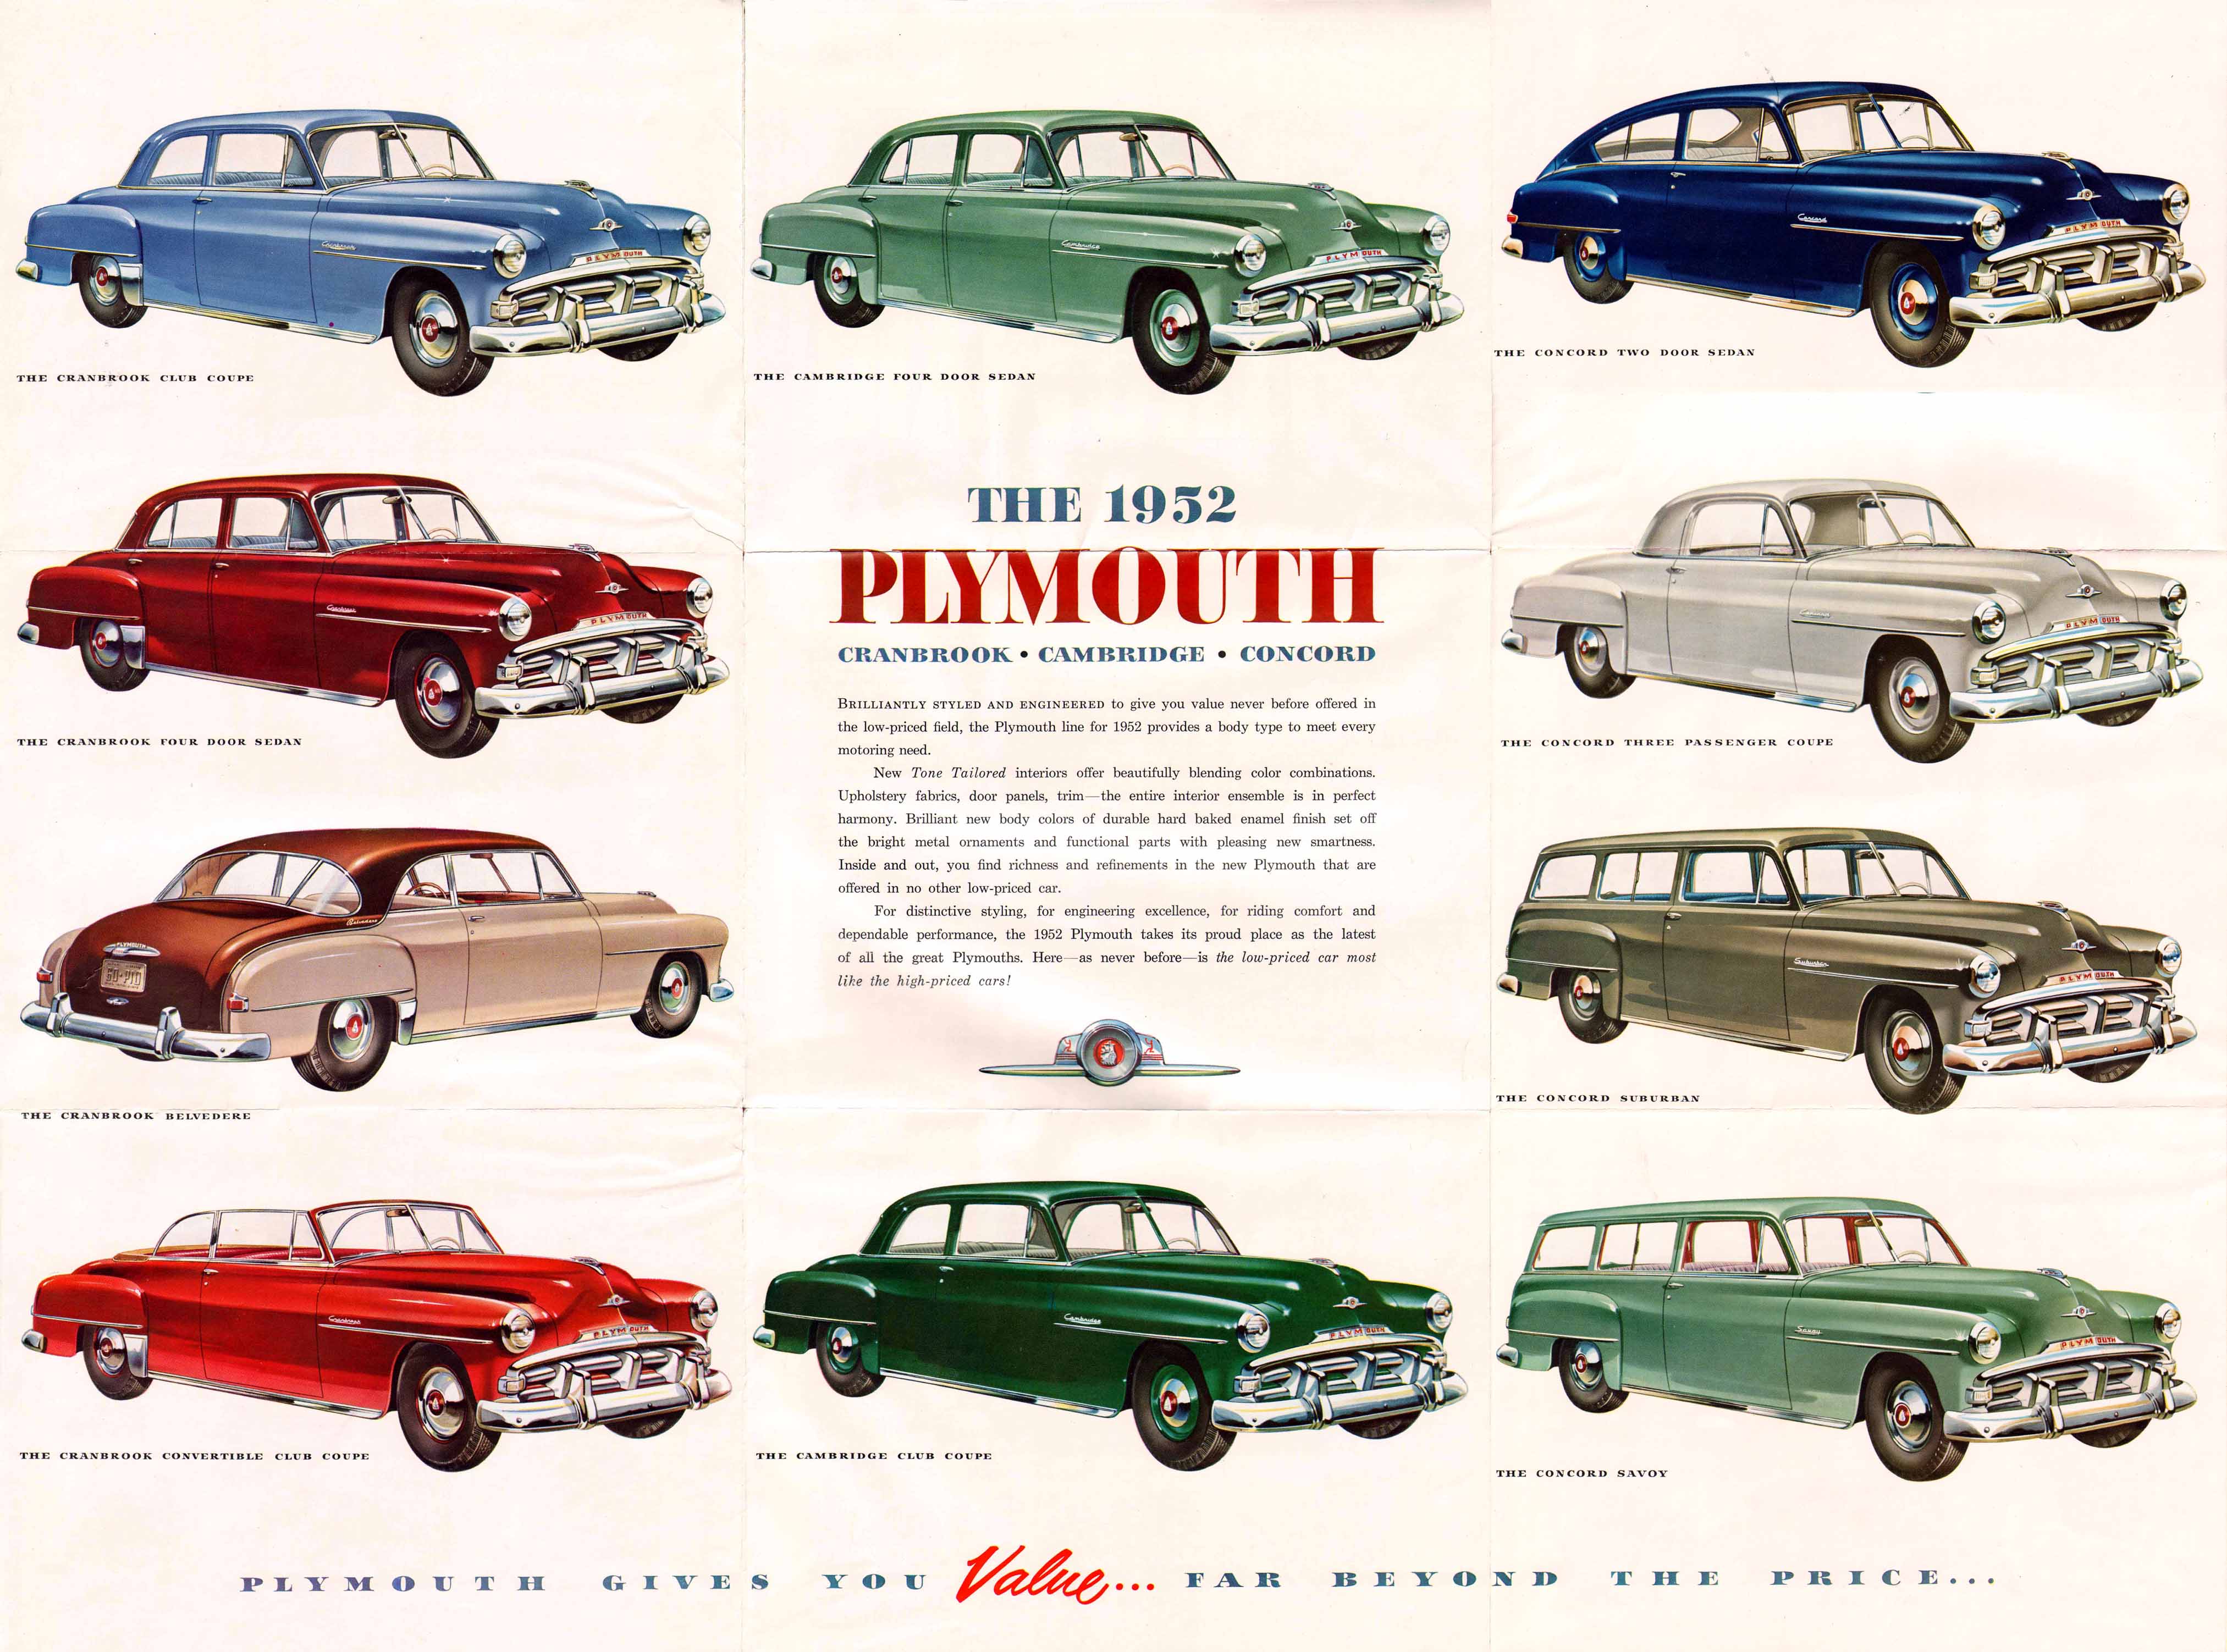 Collector Car Corner - Plymouth fondly remembered